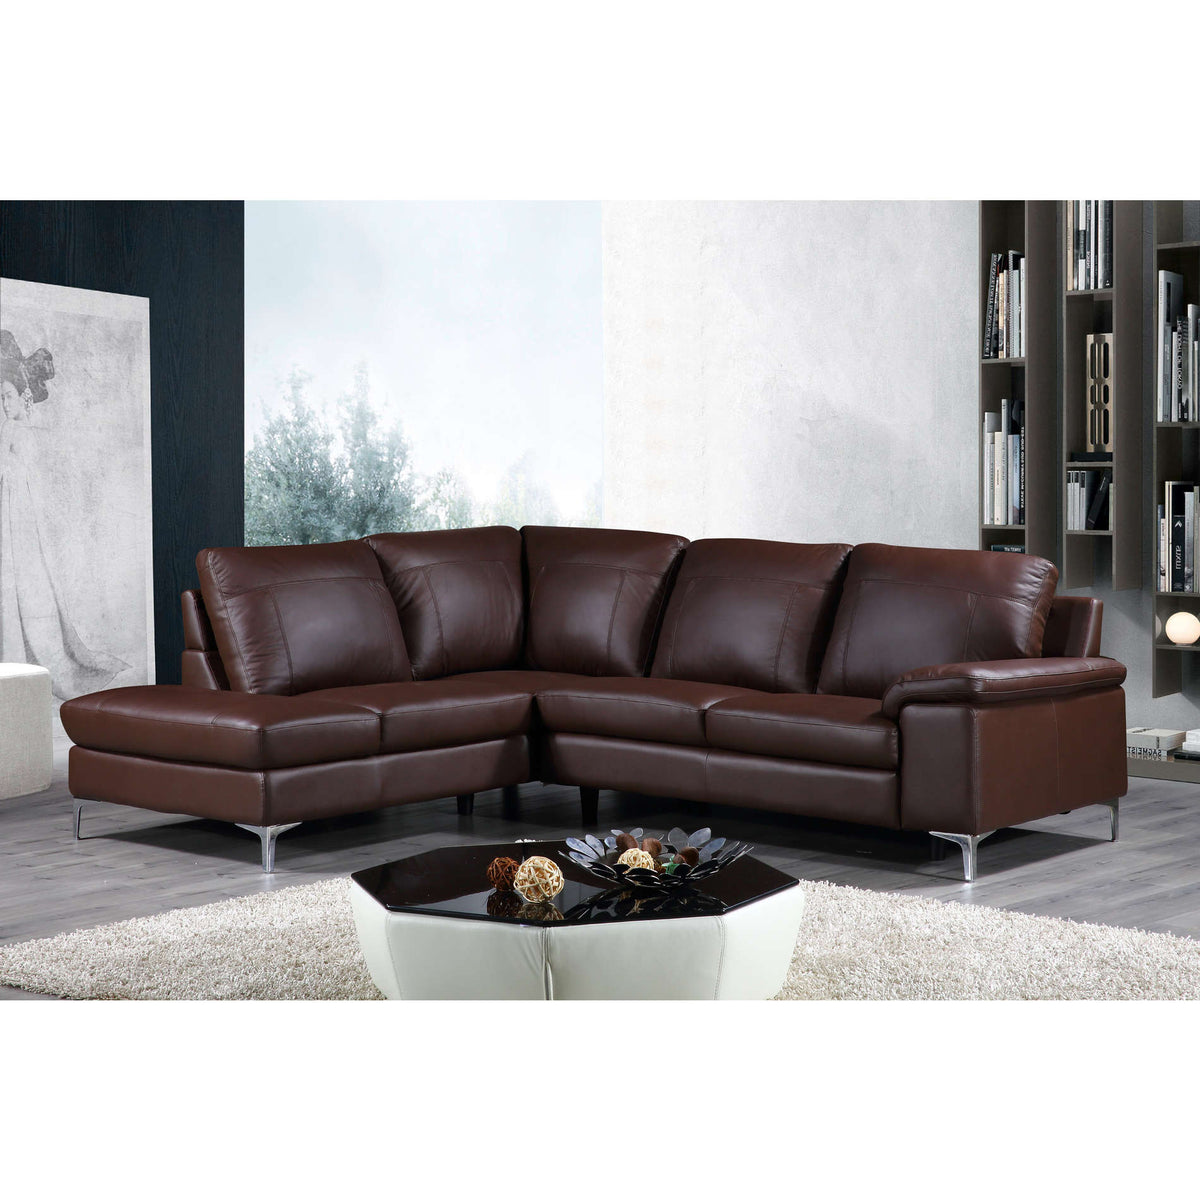 Cortesi Home Contemporary Dallas Genuine Leather Sectional Sofa with Left Side Facing Chaise Lounge, Brown 80&quot;x98&quot;